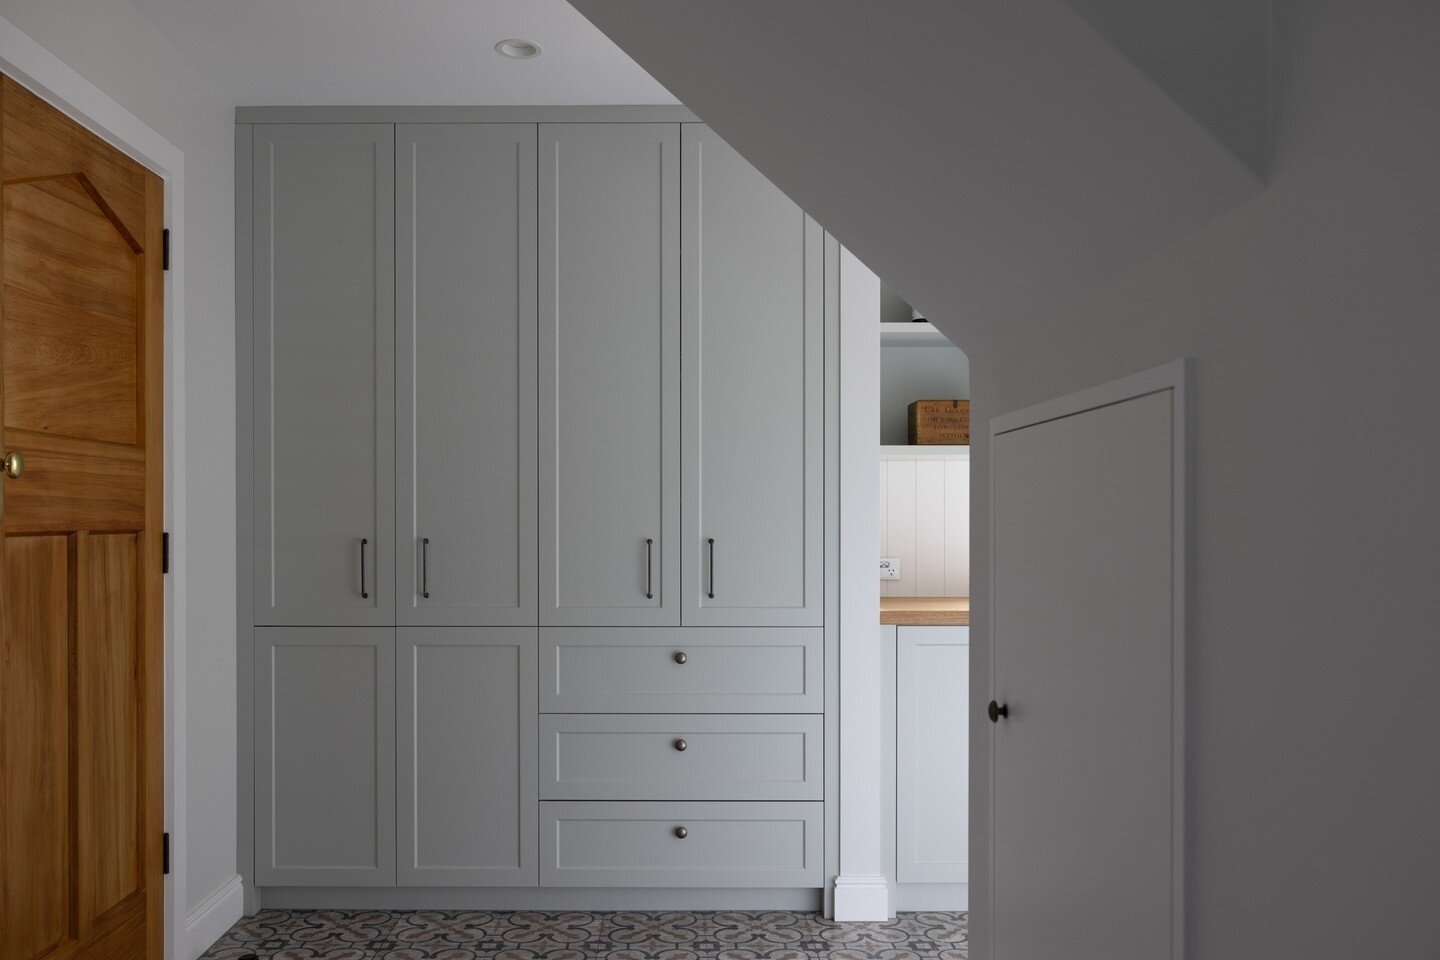 ~ Custom Laundry Joinery at our Banks Peninsula Renovation~⁠
⁠
At Armstrong Interiors we offer a range of services to suit your needs when building or renovating your home.⁠
~ Kitchen Design⁠
~ Bathroom Design⁠
~ Joinery Design⁠
~ Space Planning &amp